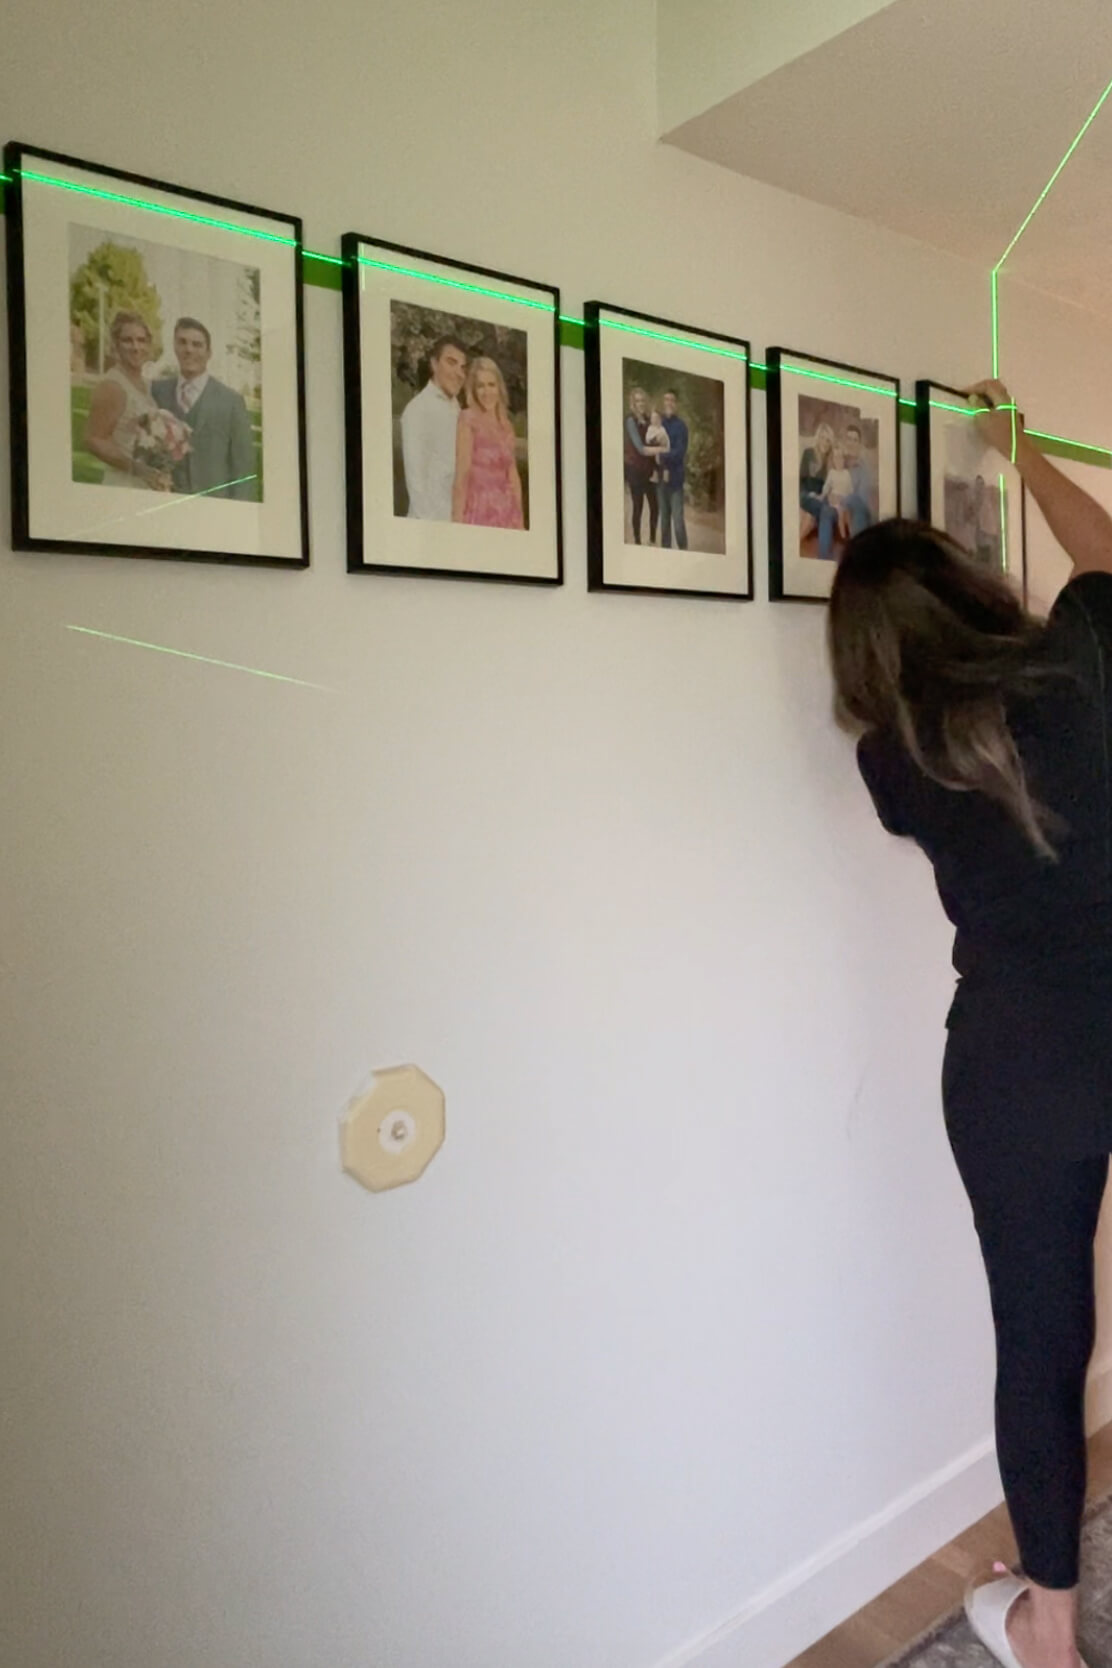 Hanging a gallery wall with family photos.